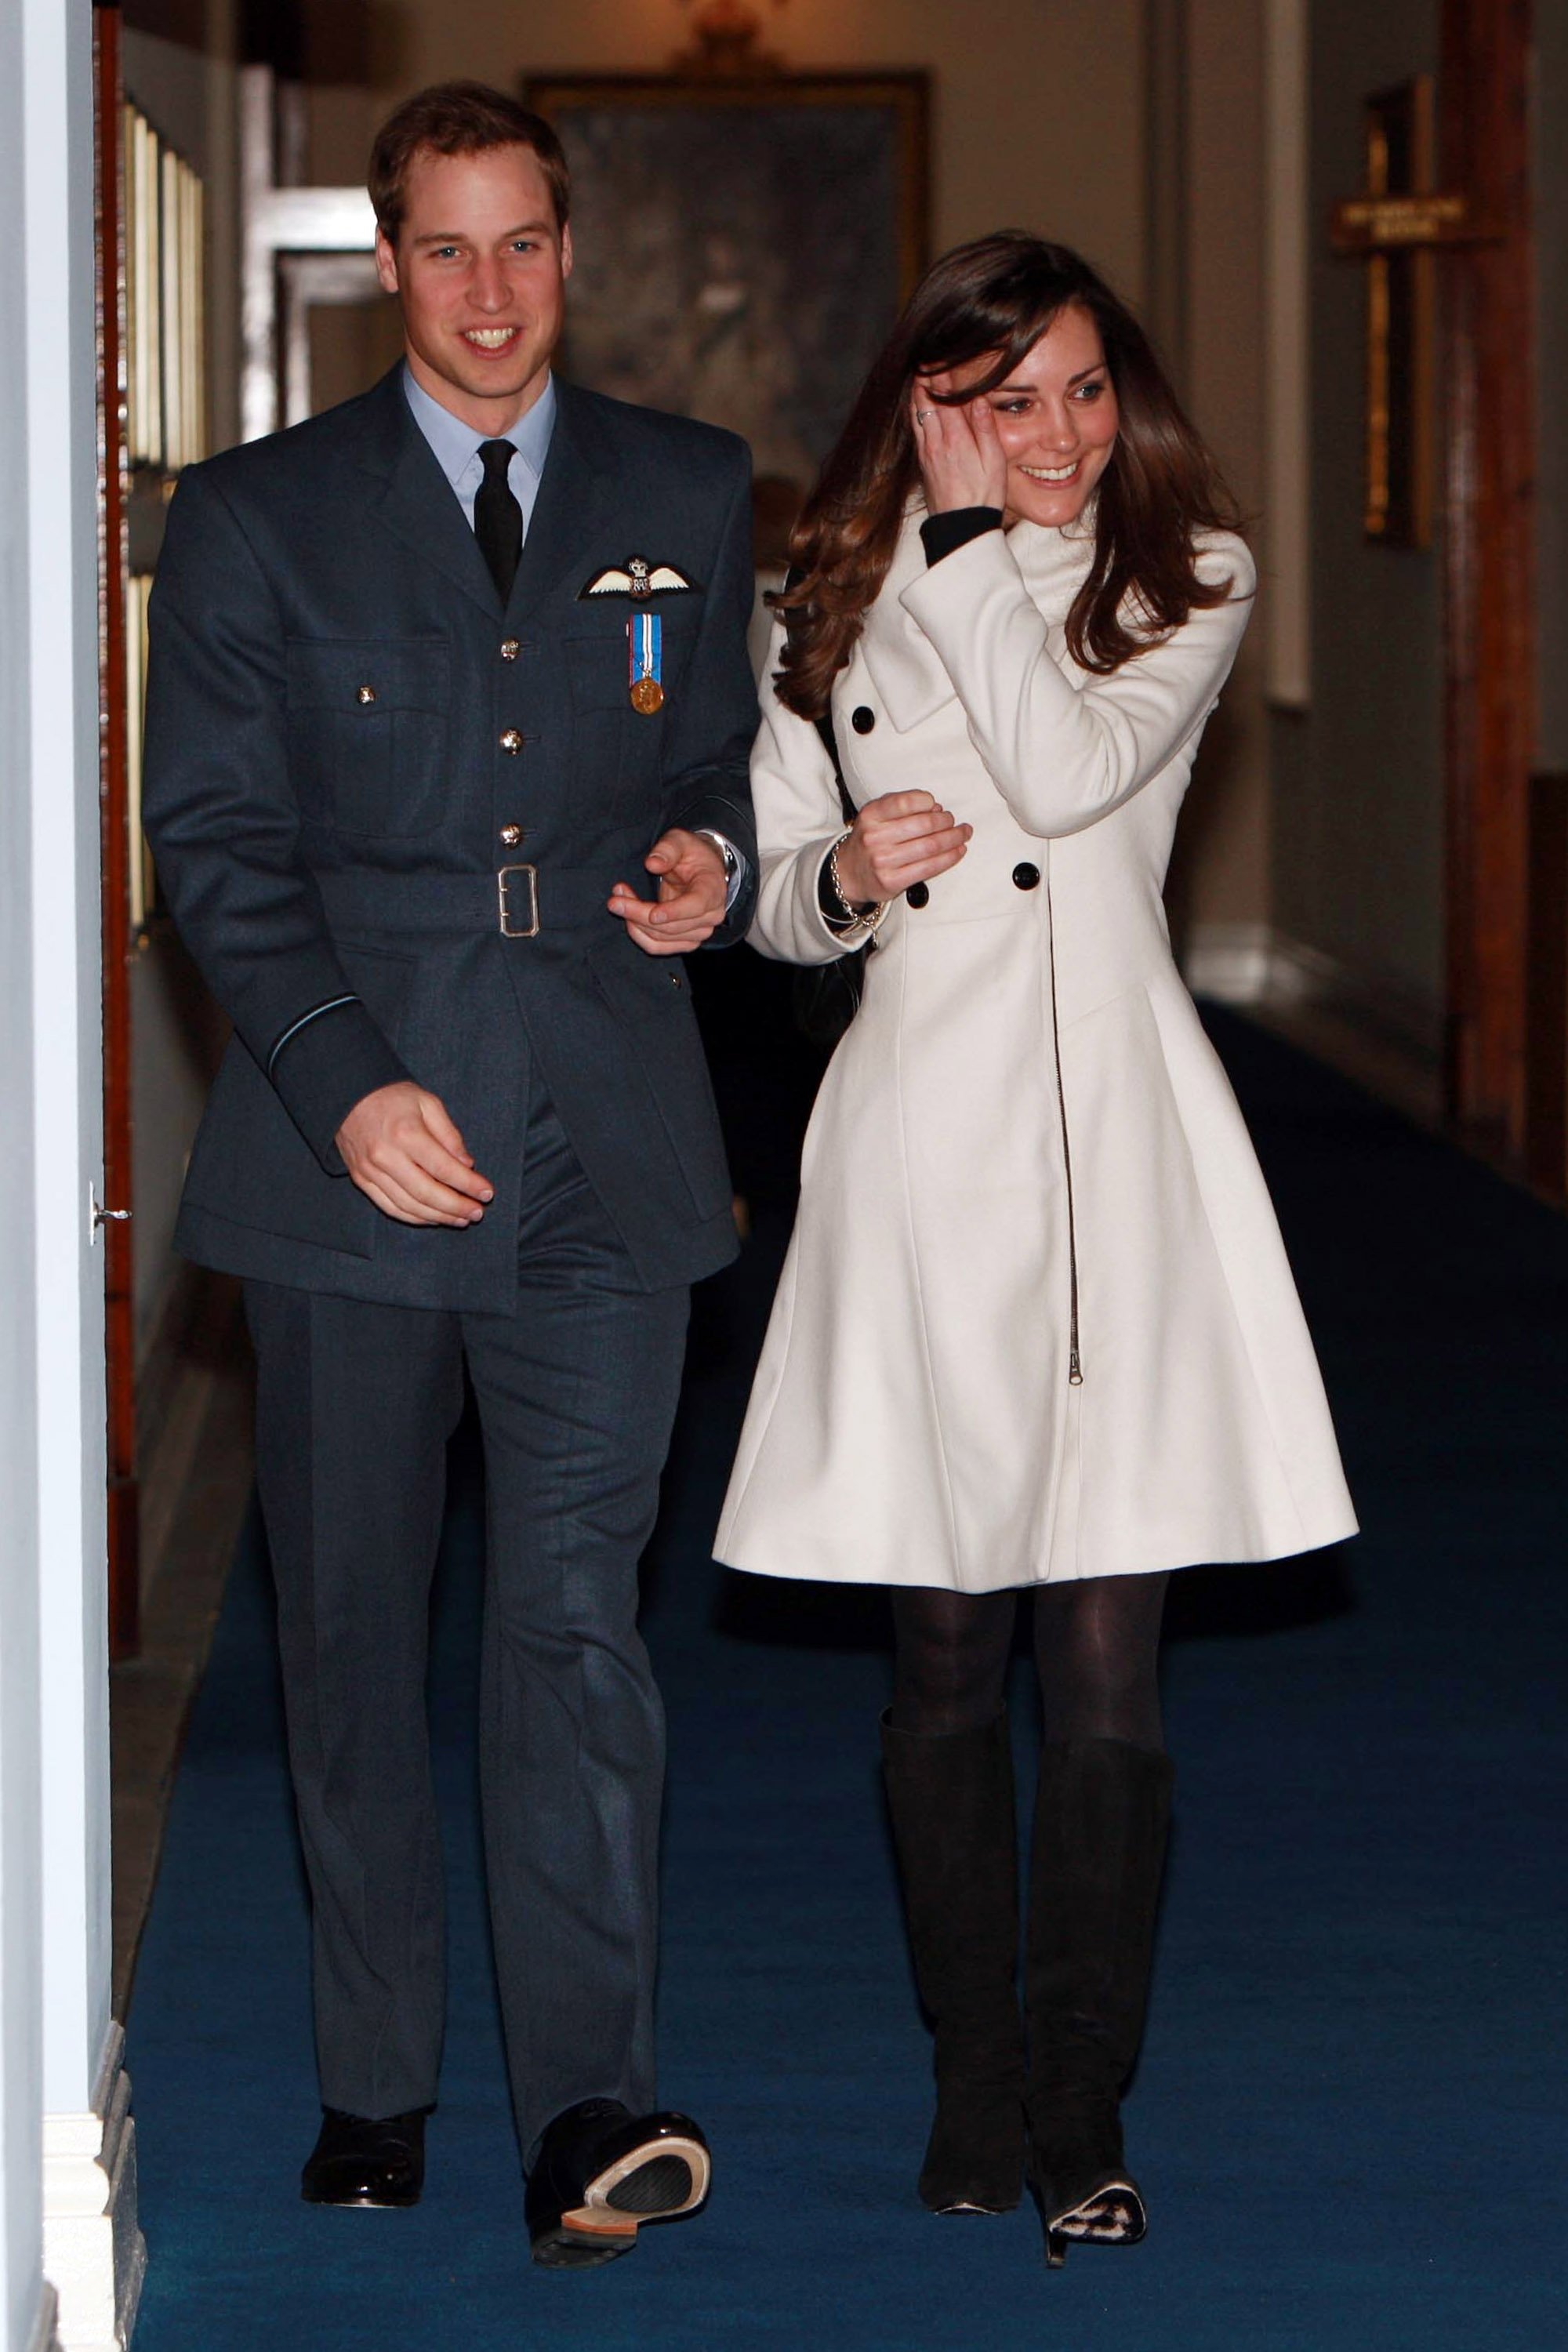 Prince William with Kate Middleton after his graduation ceremony at RAF Cranwell on April 11, 2008, in Cranwell, England | Source: Getty Images